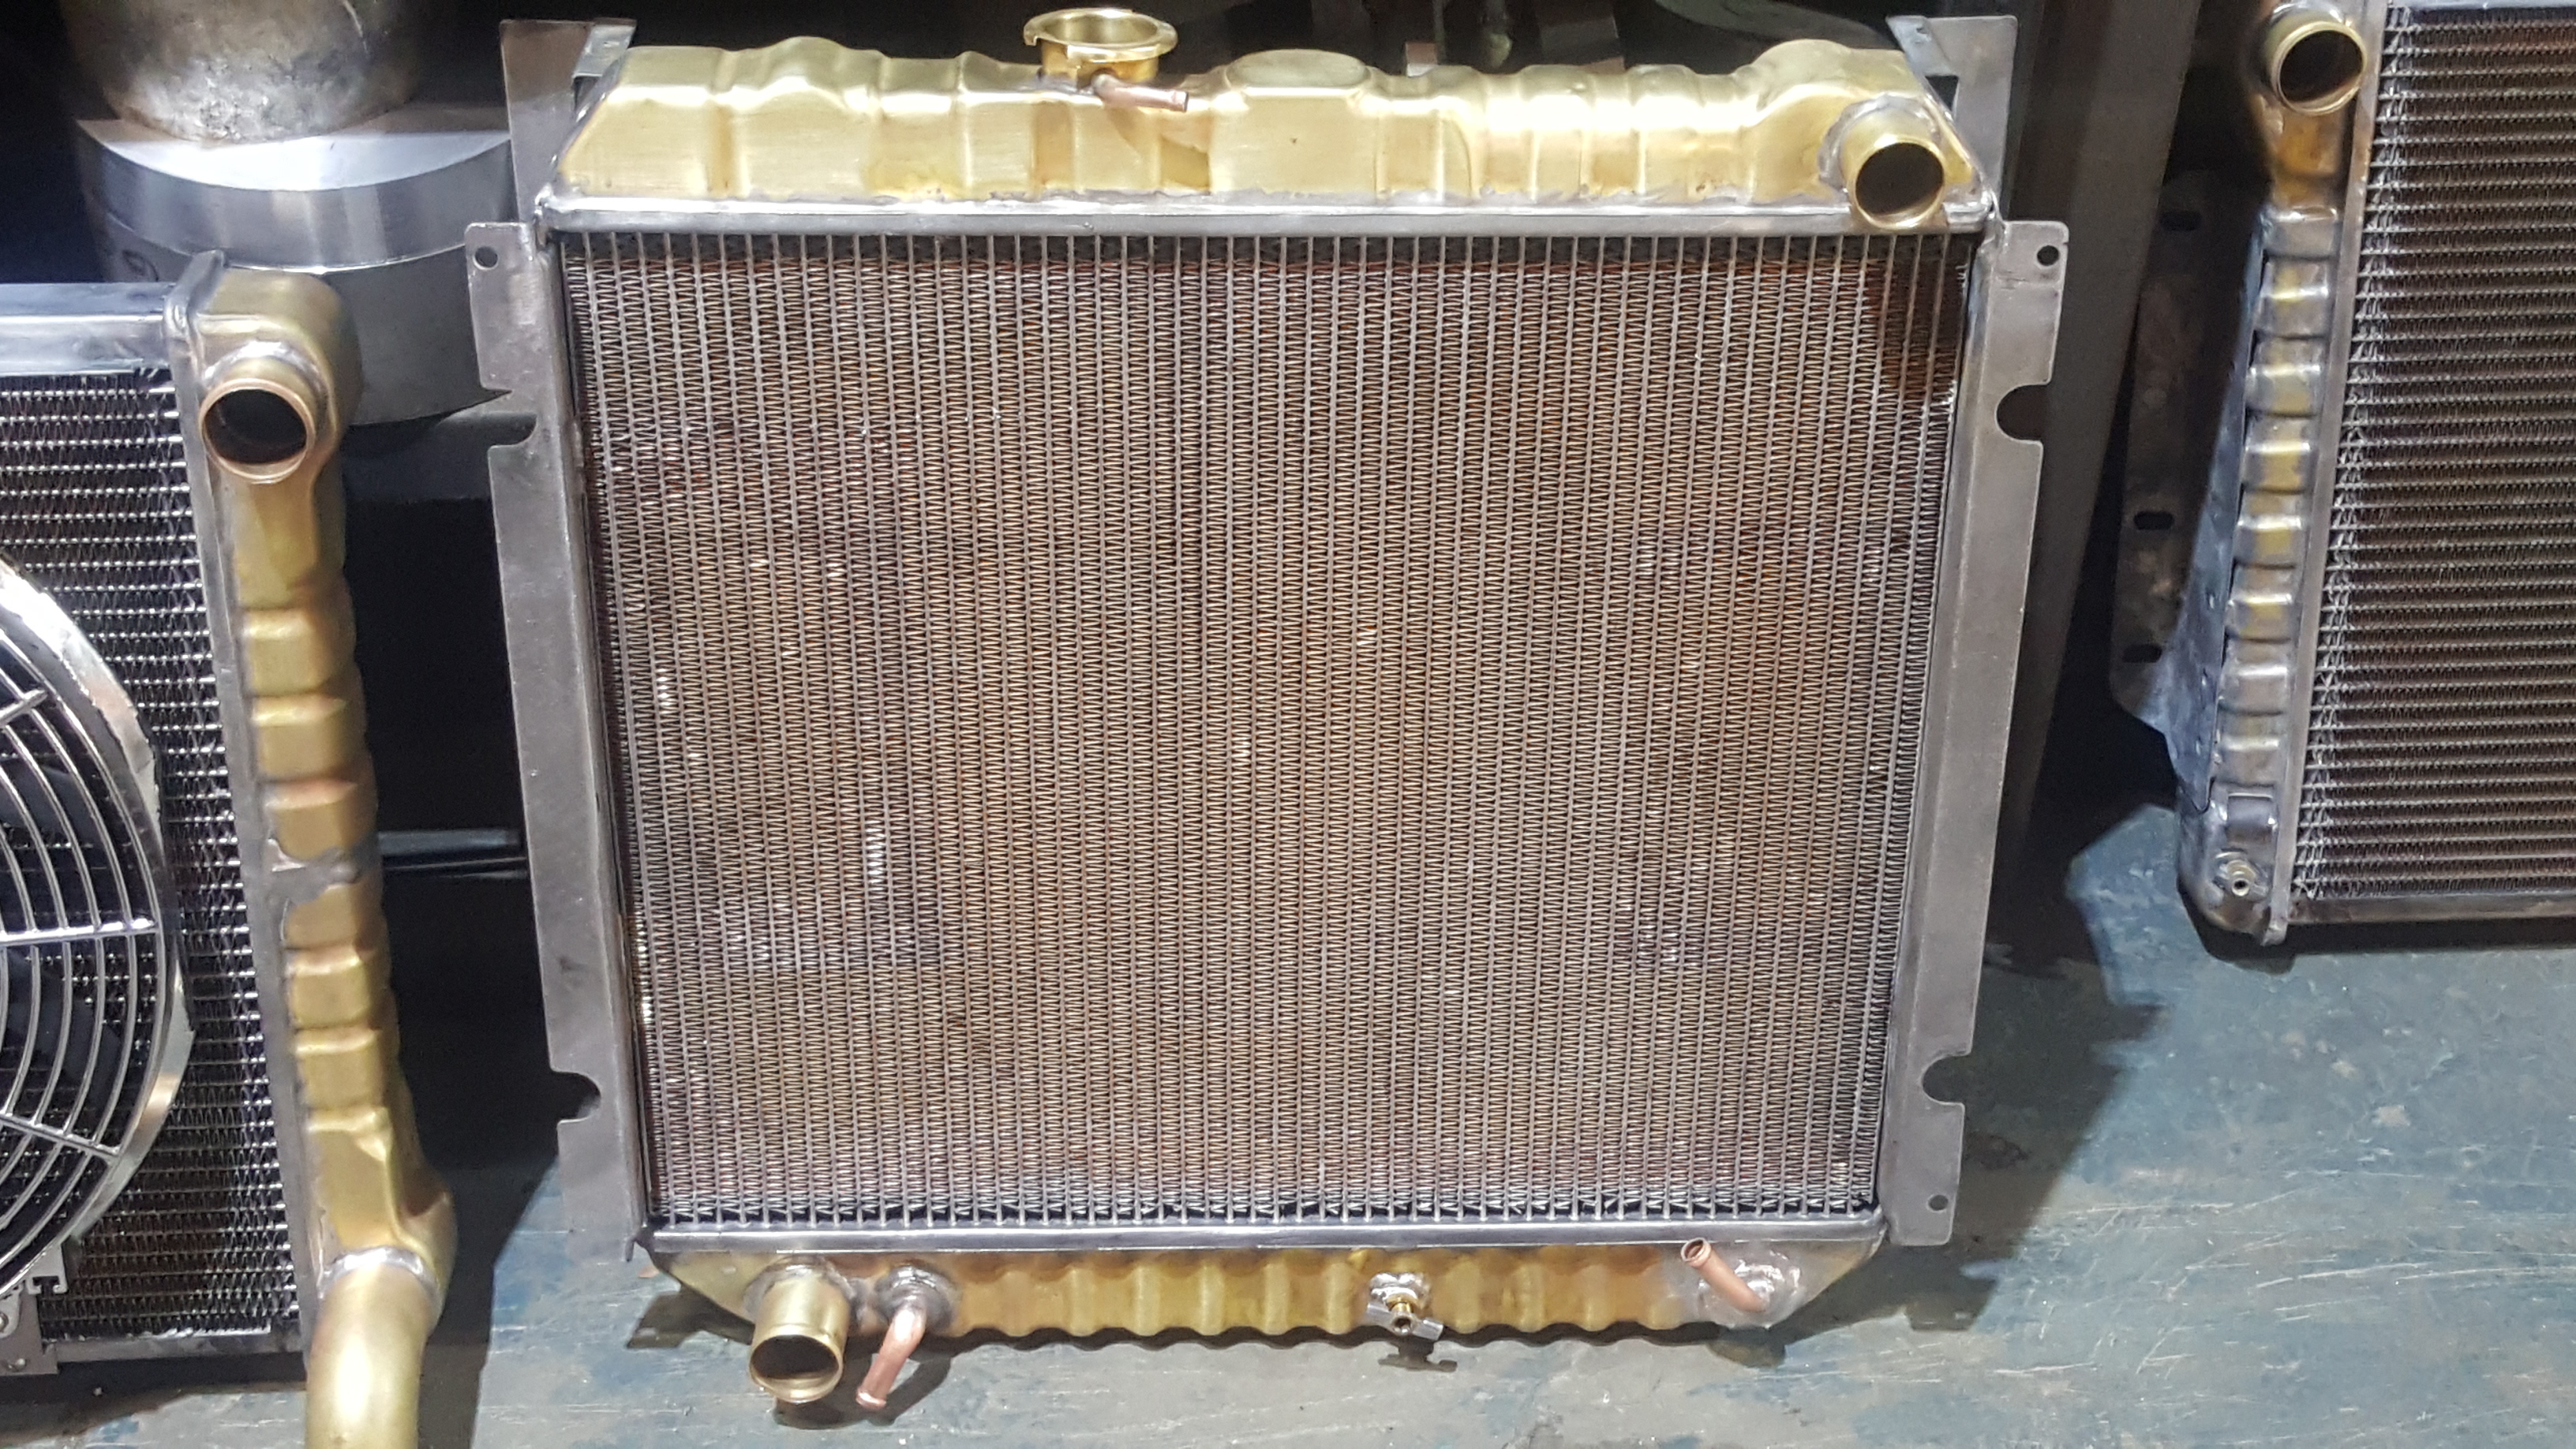 All Metal Copper and Brass High Efficiency Radiator Builds - Motor 